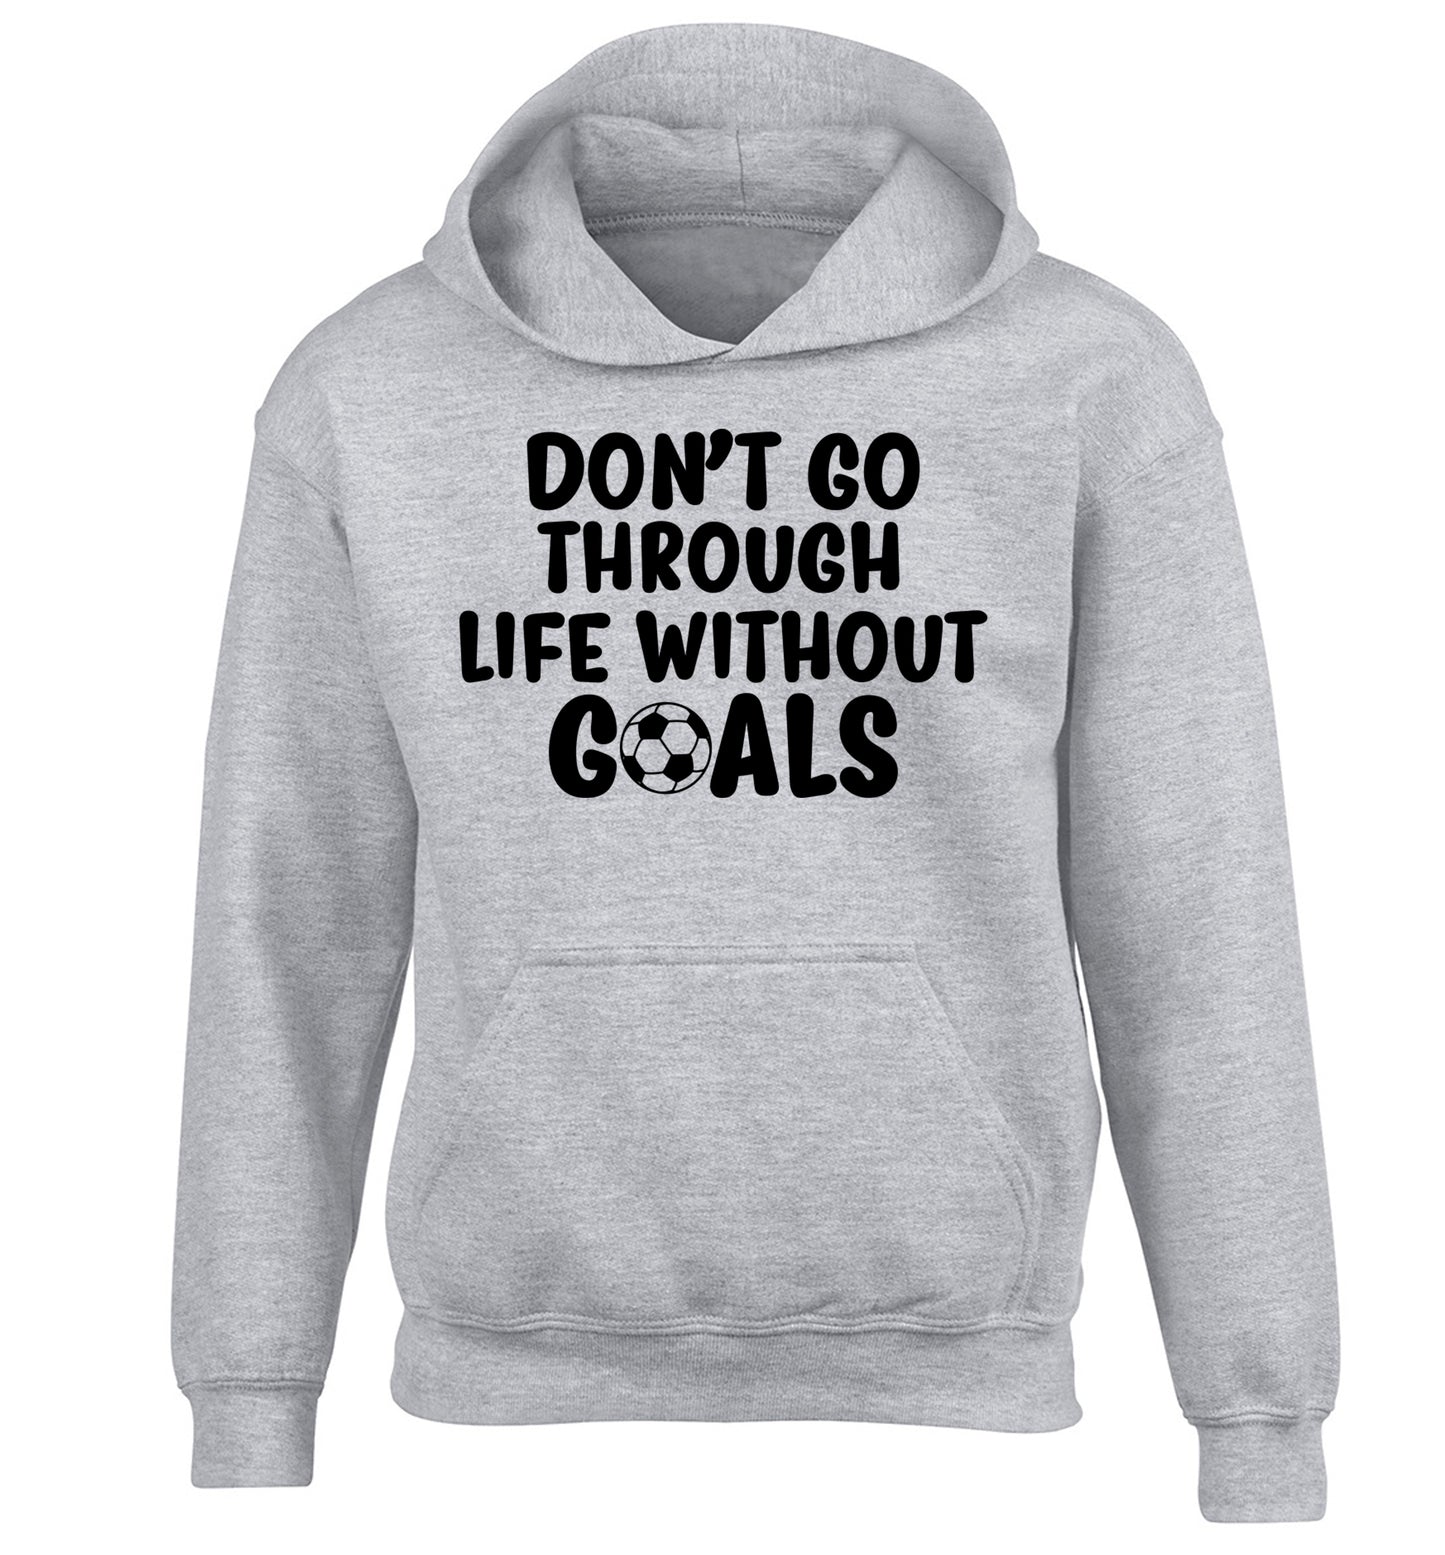 Don't go through life without goals children's grey hoodie 12-14 Years